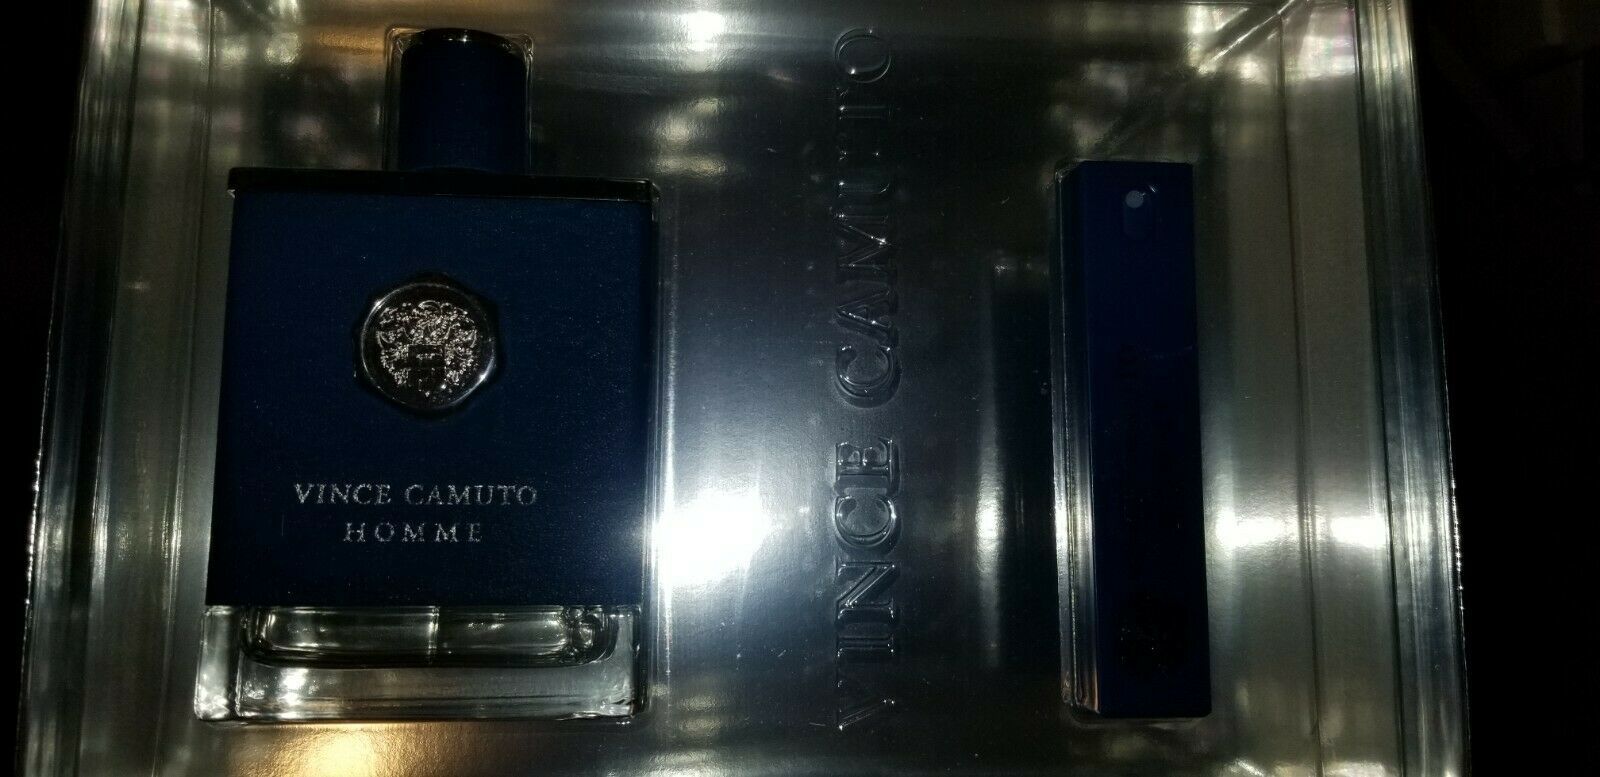 Primary image for Vince Camuto Men's 2-Pc. Homme Gift Set